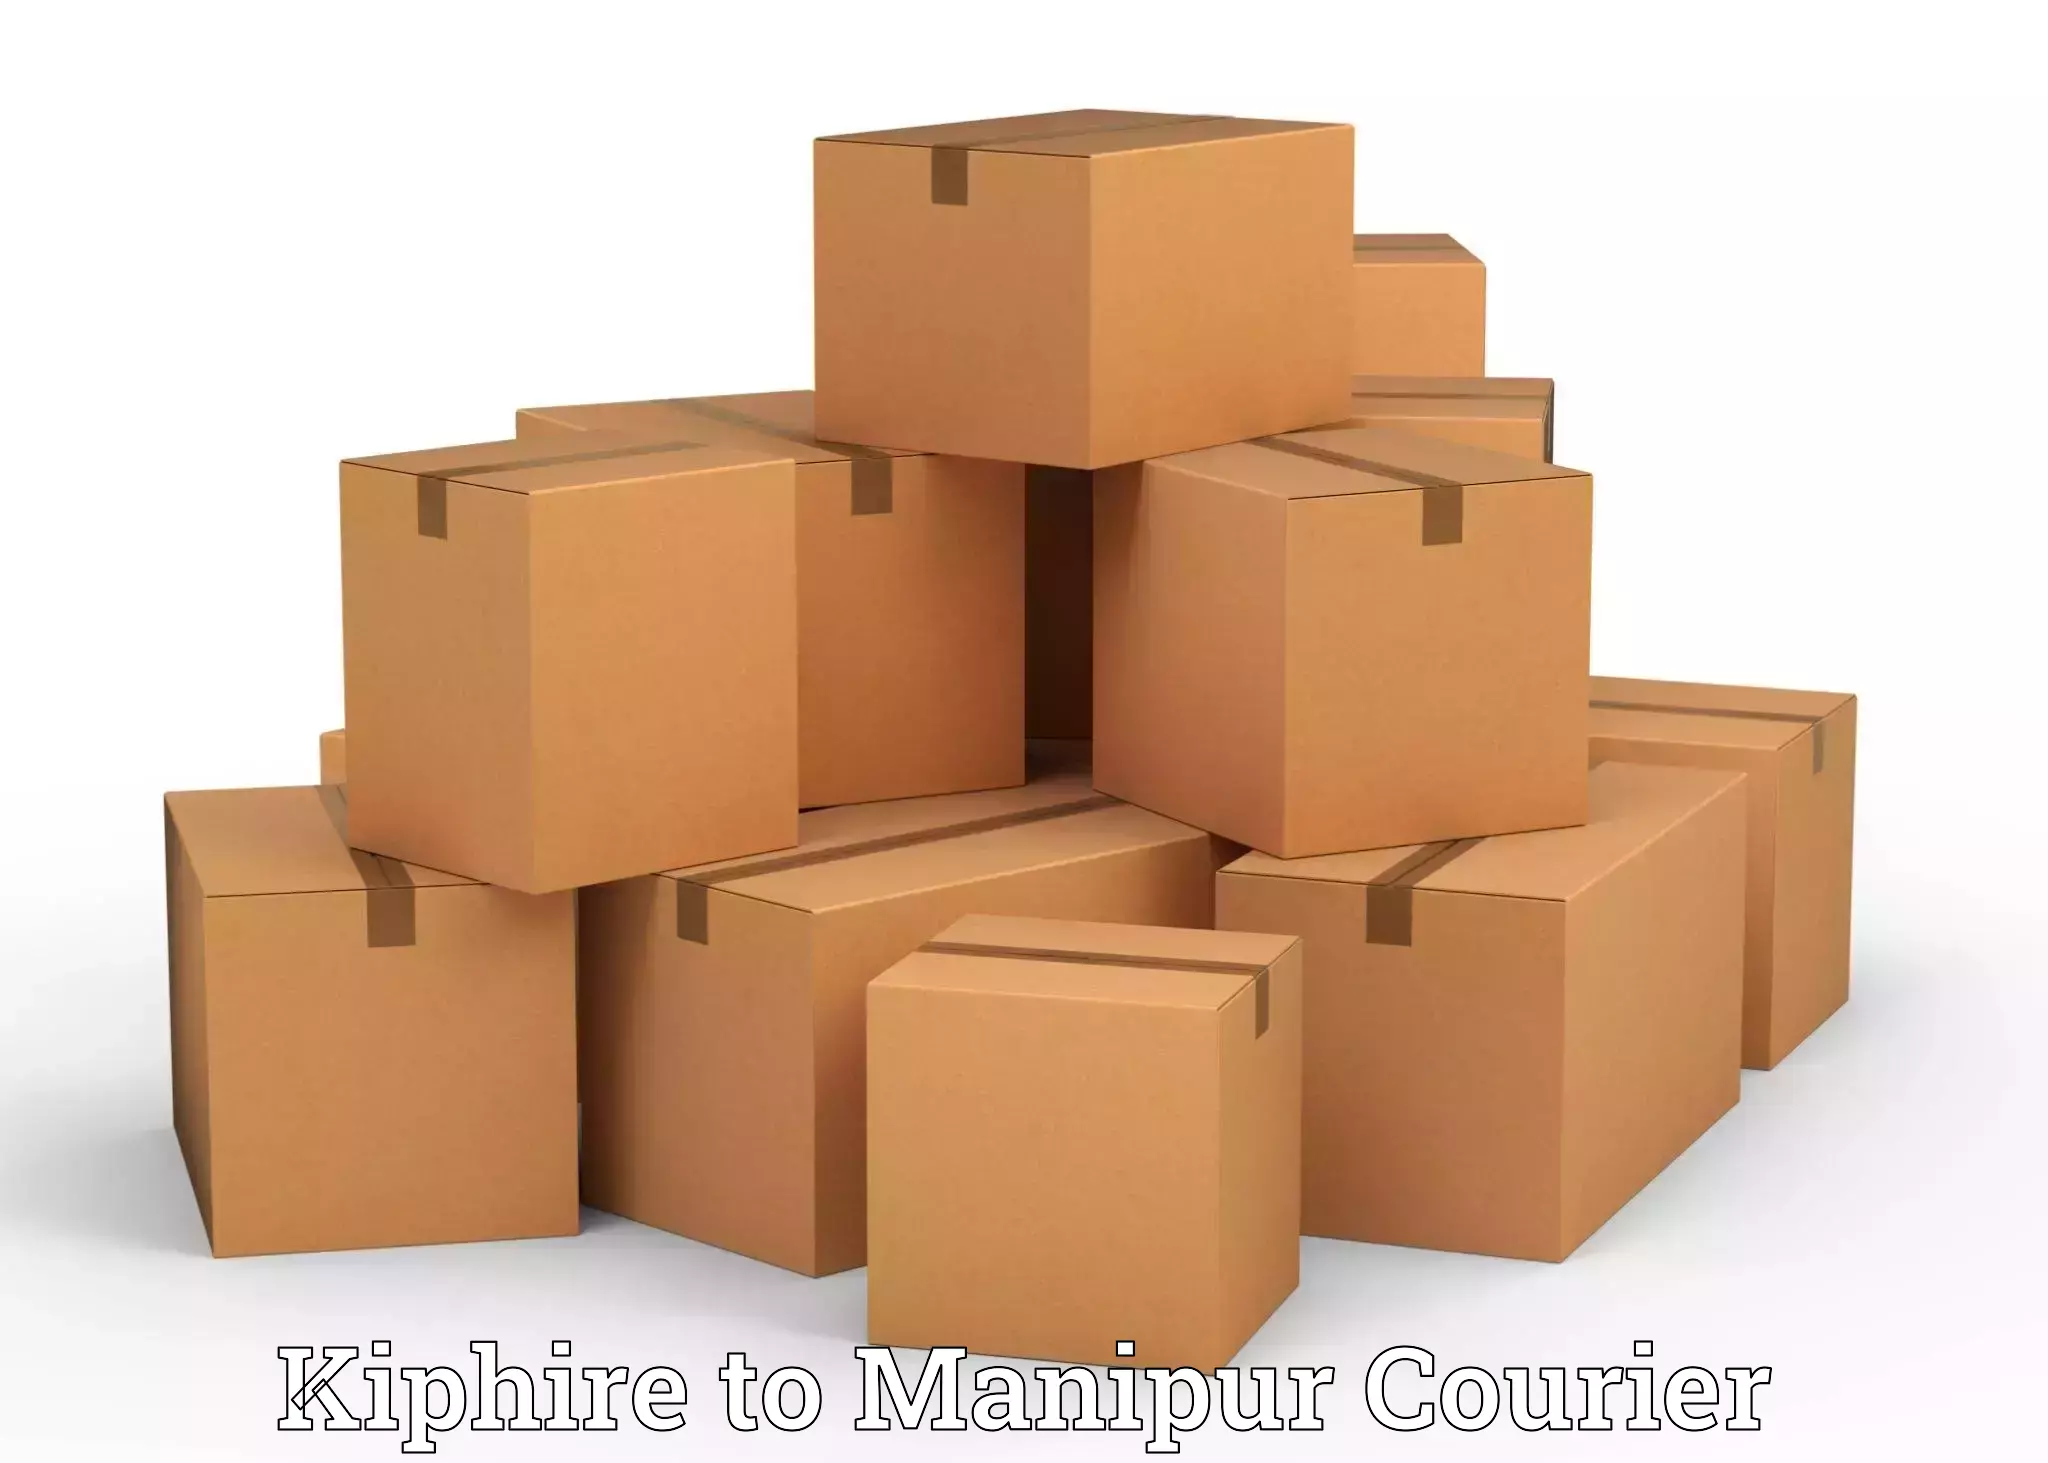 Furniture transport company Kiphire to Manipur